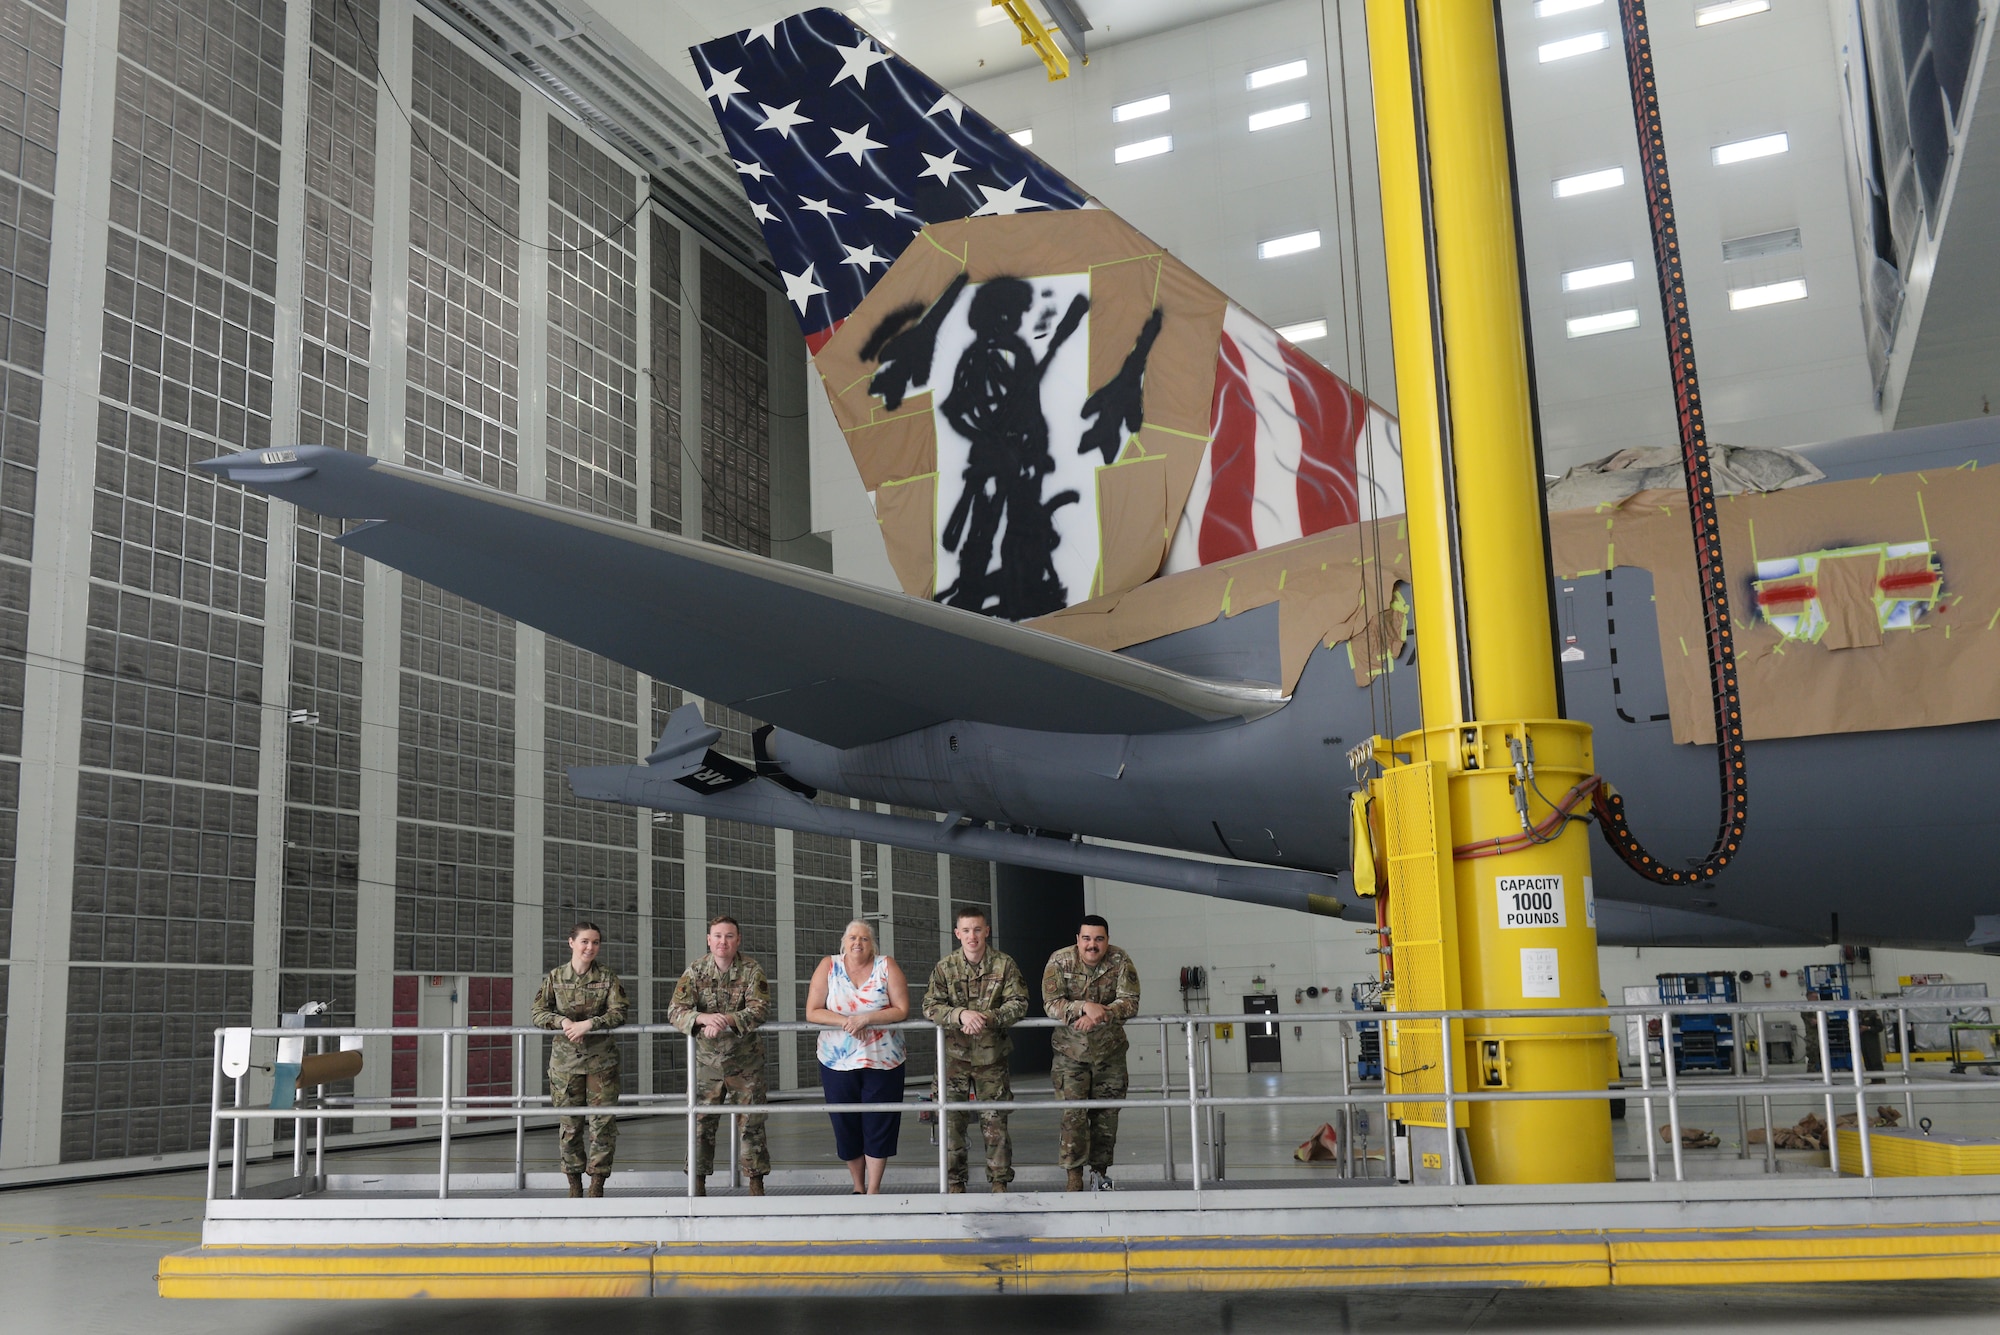 A team of 157th Air Refueling Wing maintenance Airmen, along with professional aircraft artist Shayne Meder, pause for a moment in front of their nearly complete custom paint job on the tail of a wing KC-46A, at the 176th Wing's paint booth, Joint Base Elmendorf-Richardson, June 29. From left to right: Airman 1st Class Rebekka Bloser, Tech. Sgt. Jay Cunha, Master Sgt. (retired) Shayne Meder, Staff Sgt. Kevin Canney, Staff Sgt. Cory Lewis. (U.S. Air National Guard photo by Senior Master Sgt. Timm Huffman)